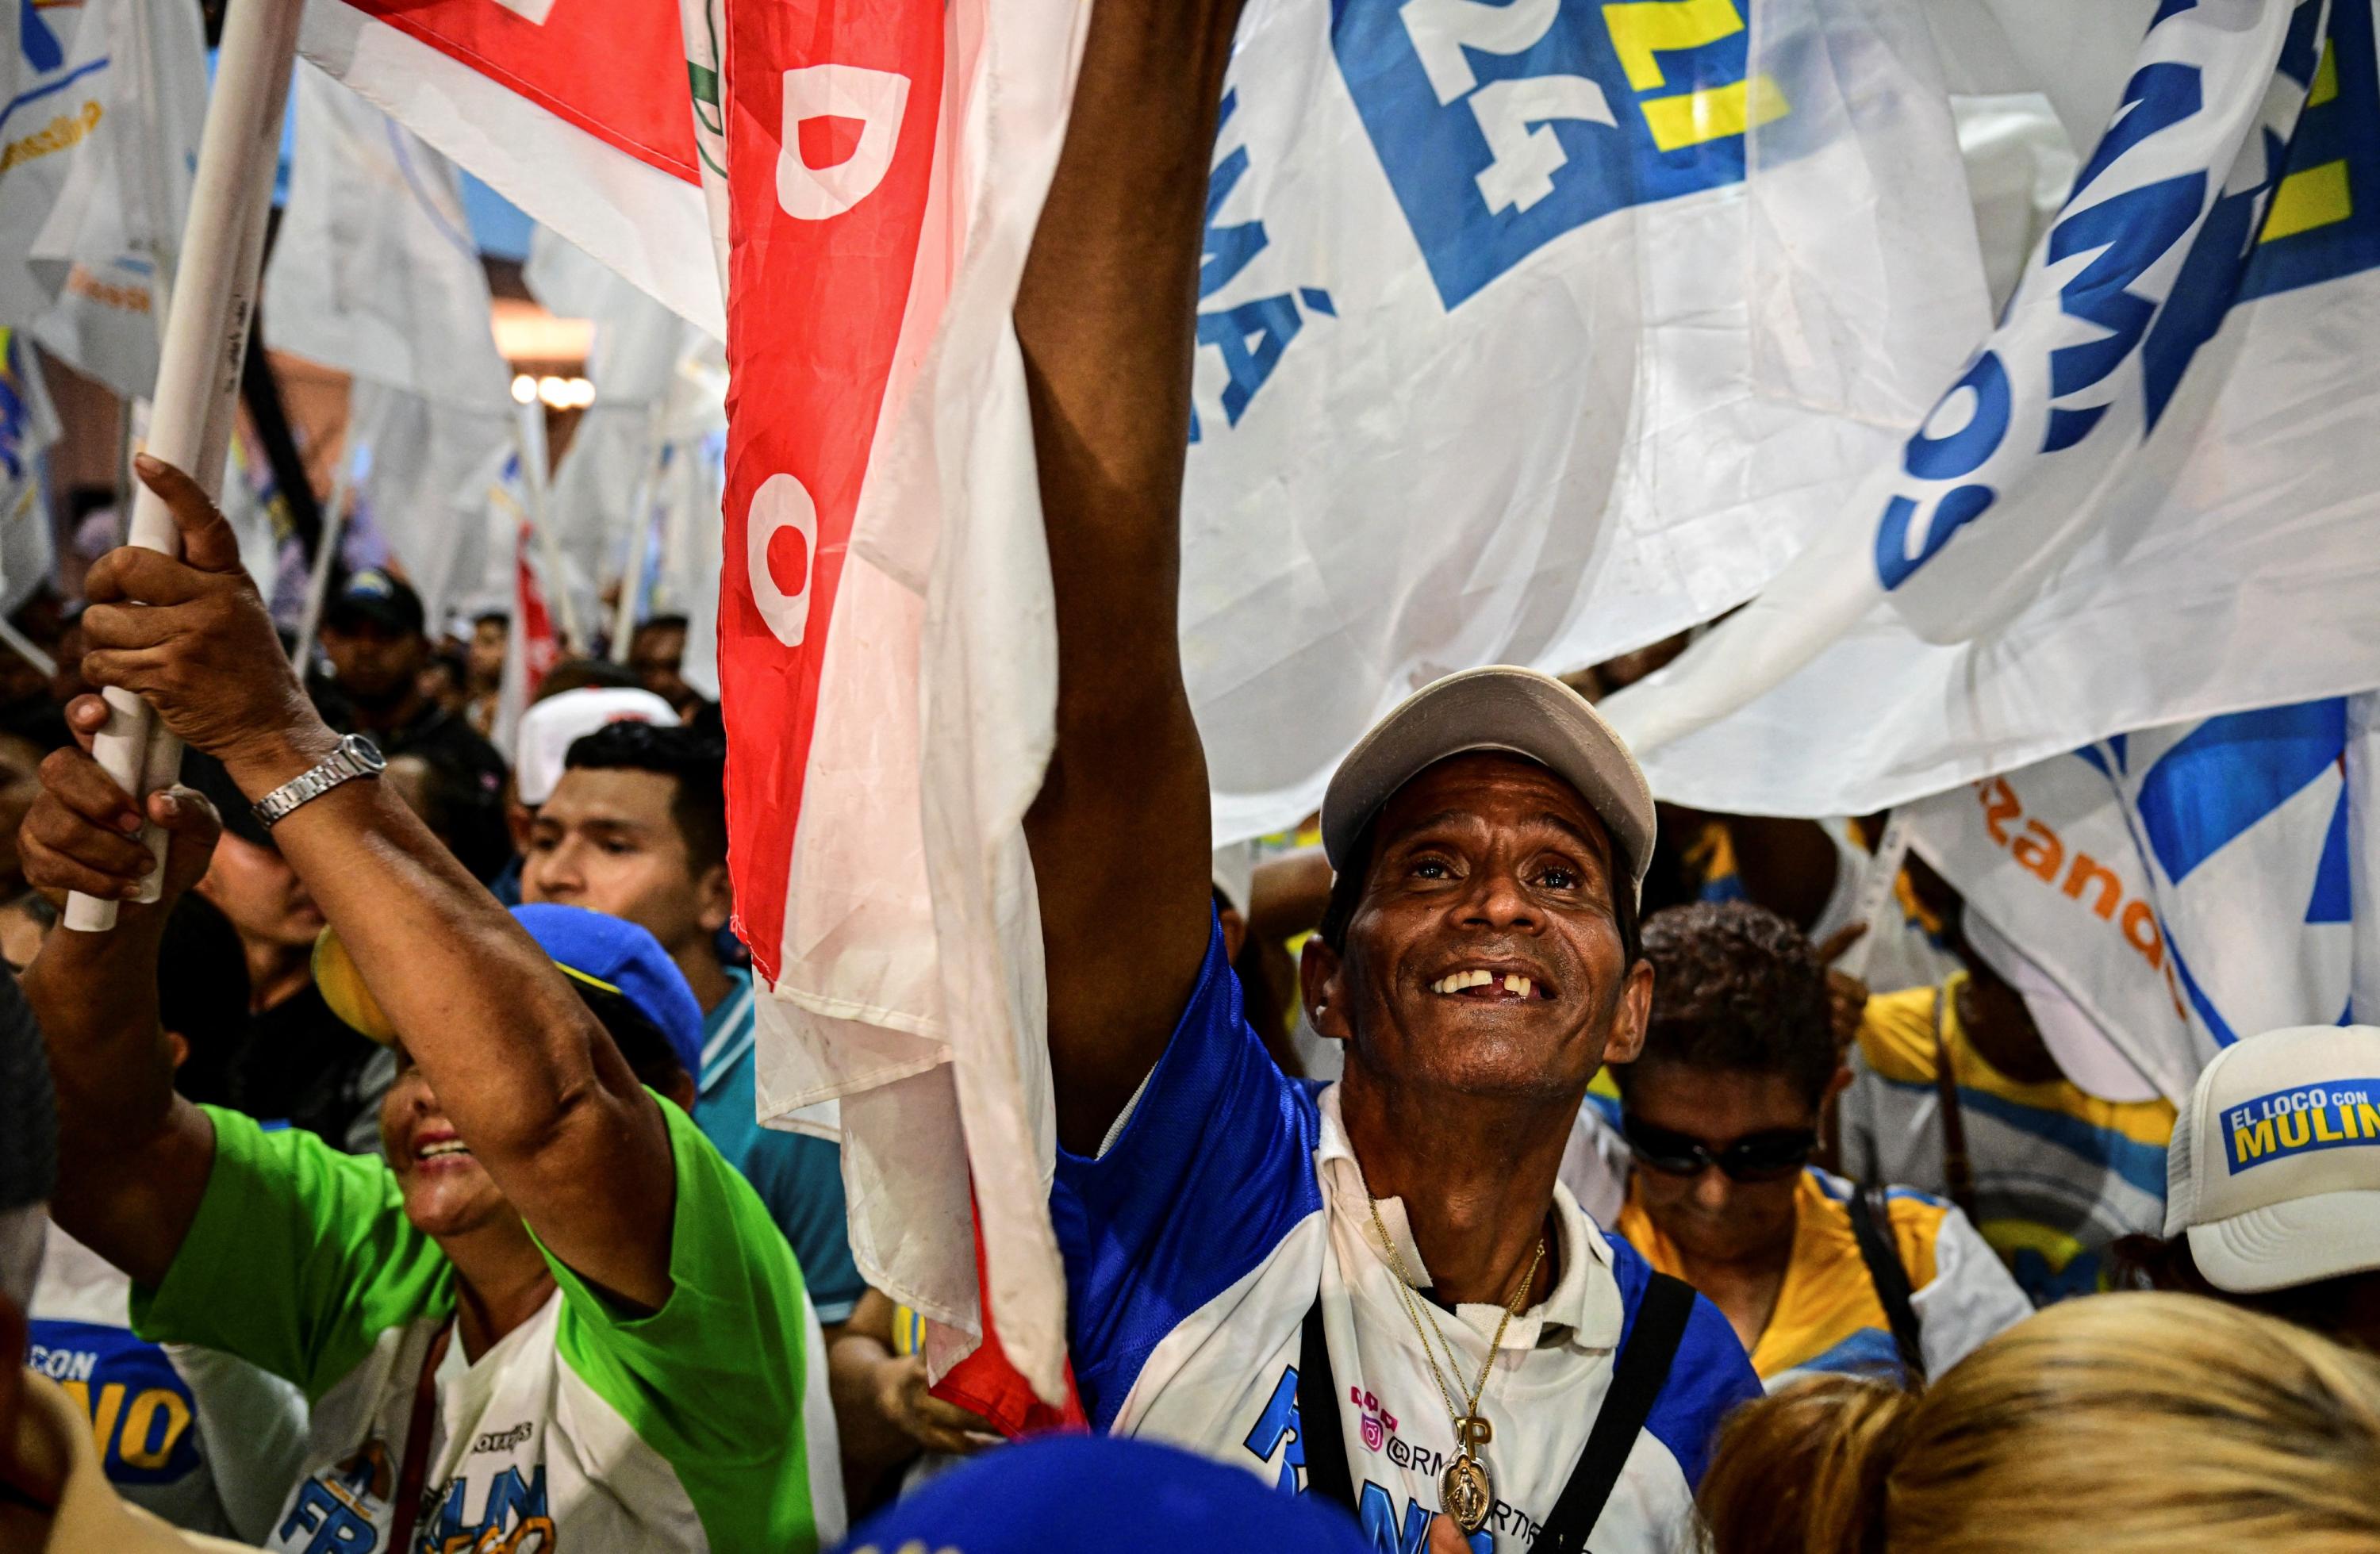 Supporters of Panama